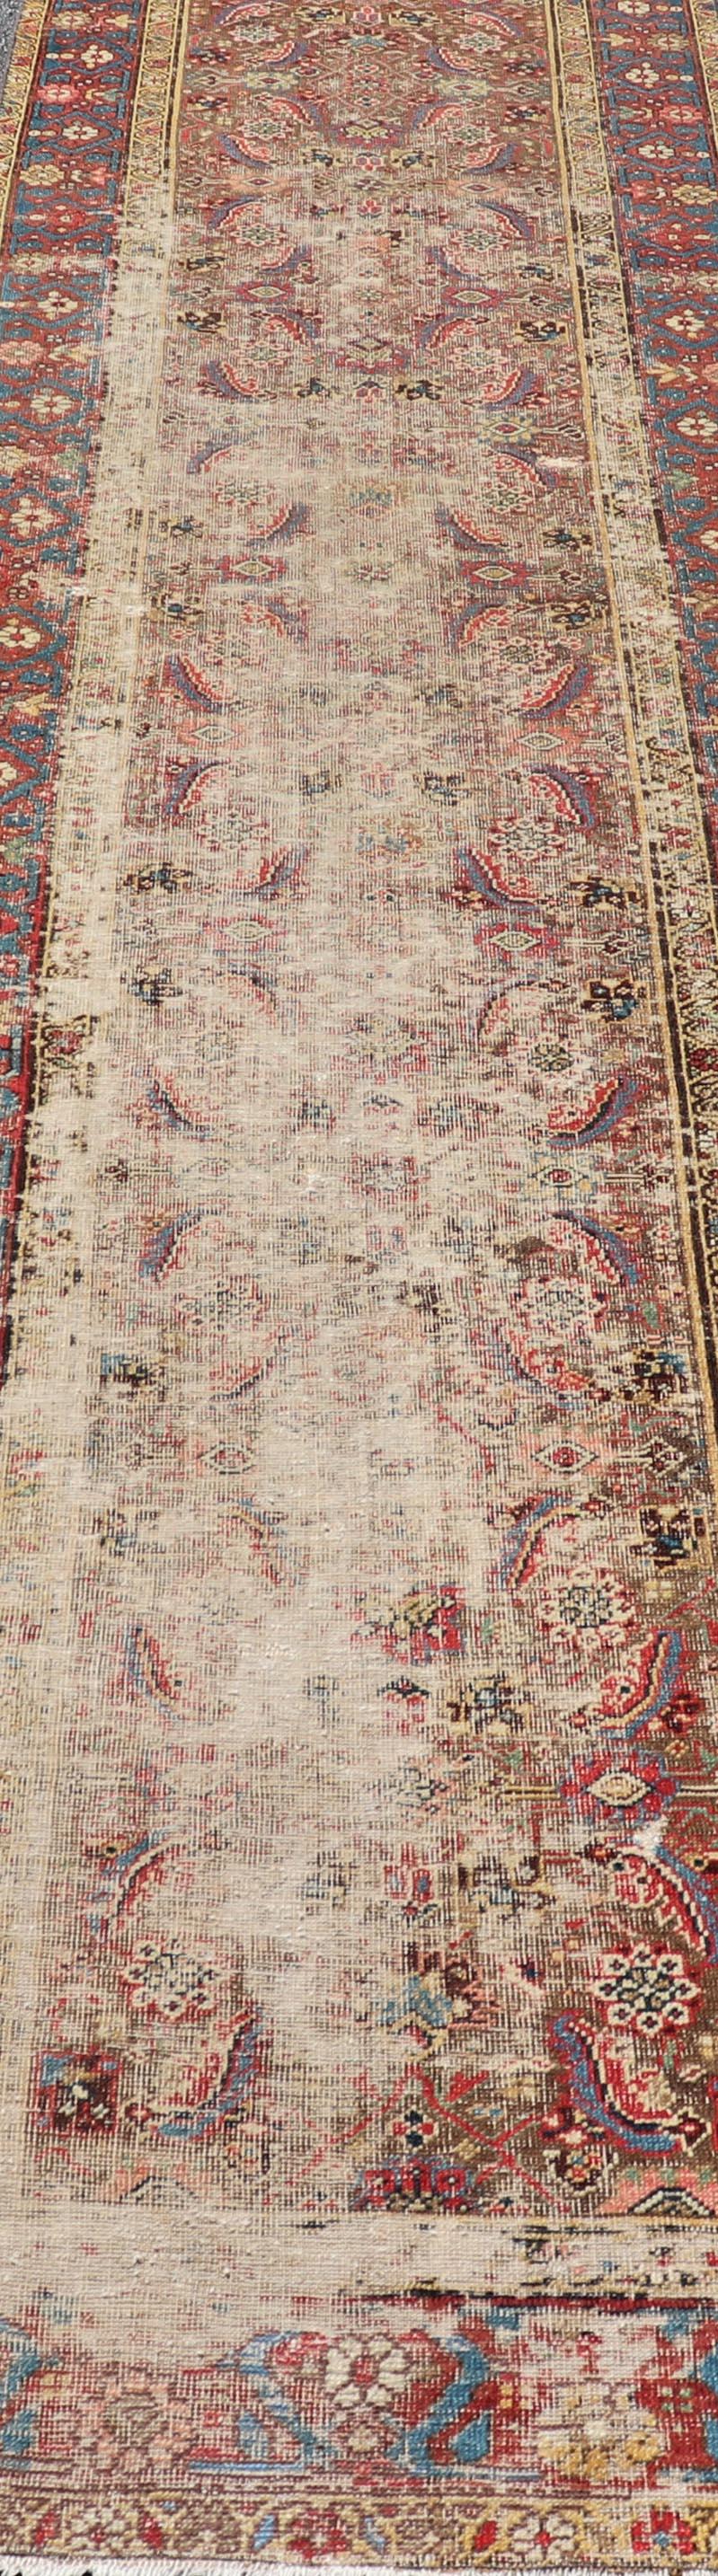 Wool Antique Persian Sultanabad Distressed Runner with Floral Design in Jewel Tones